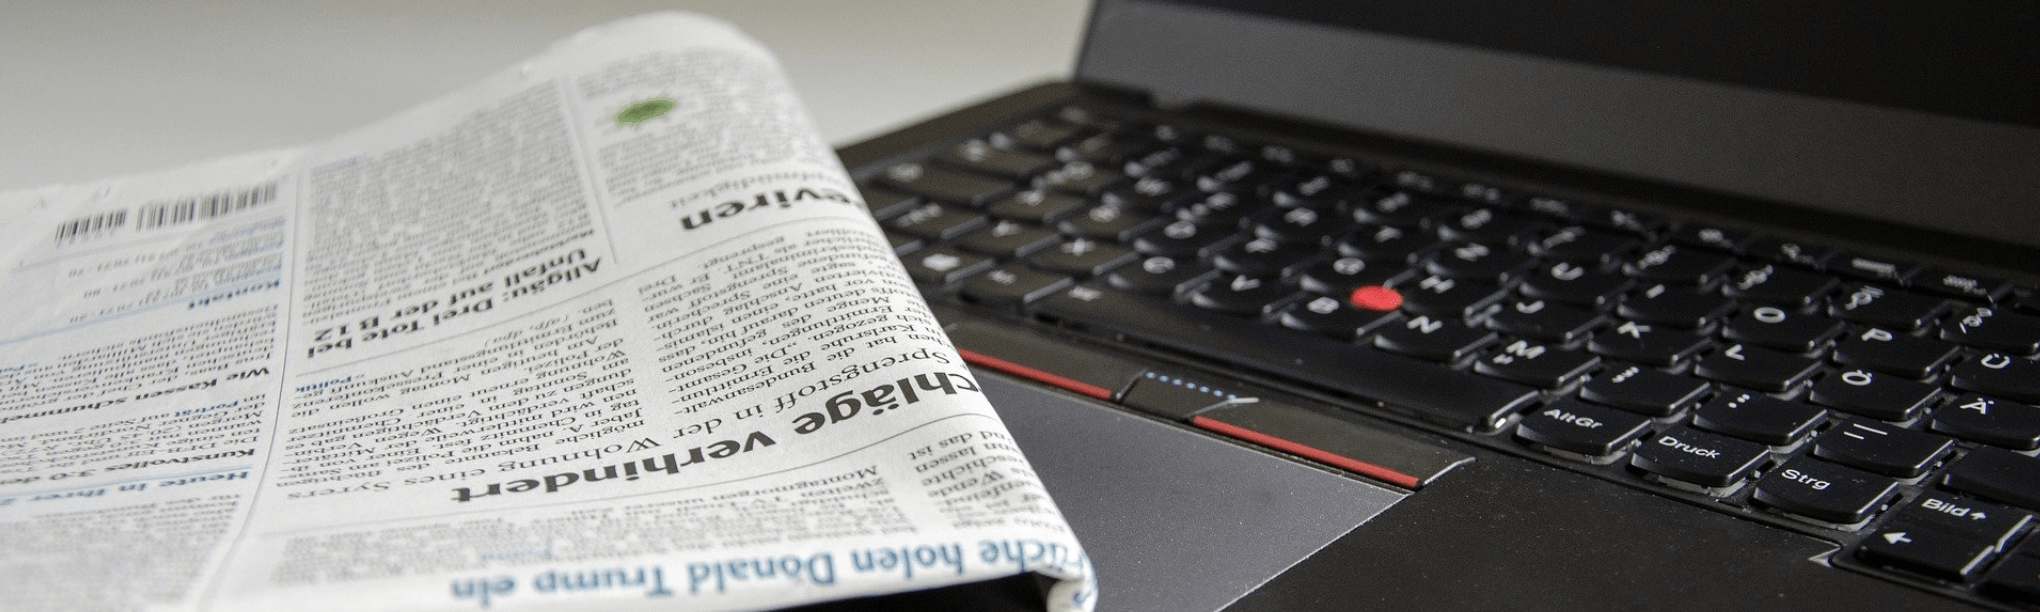 A Black Color Laptop With a Newspaper